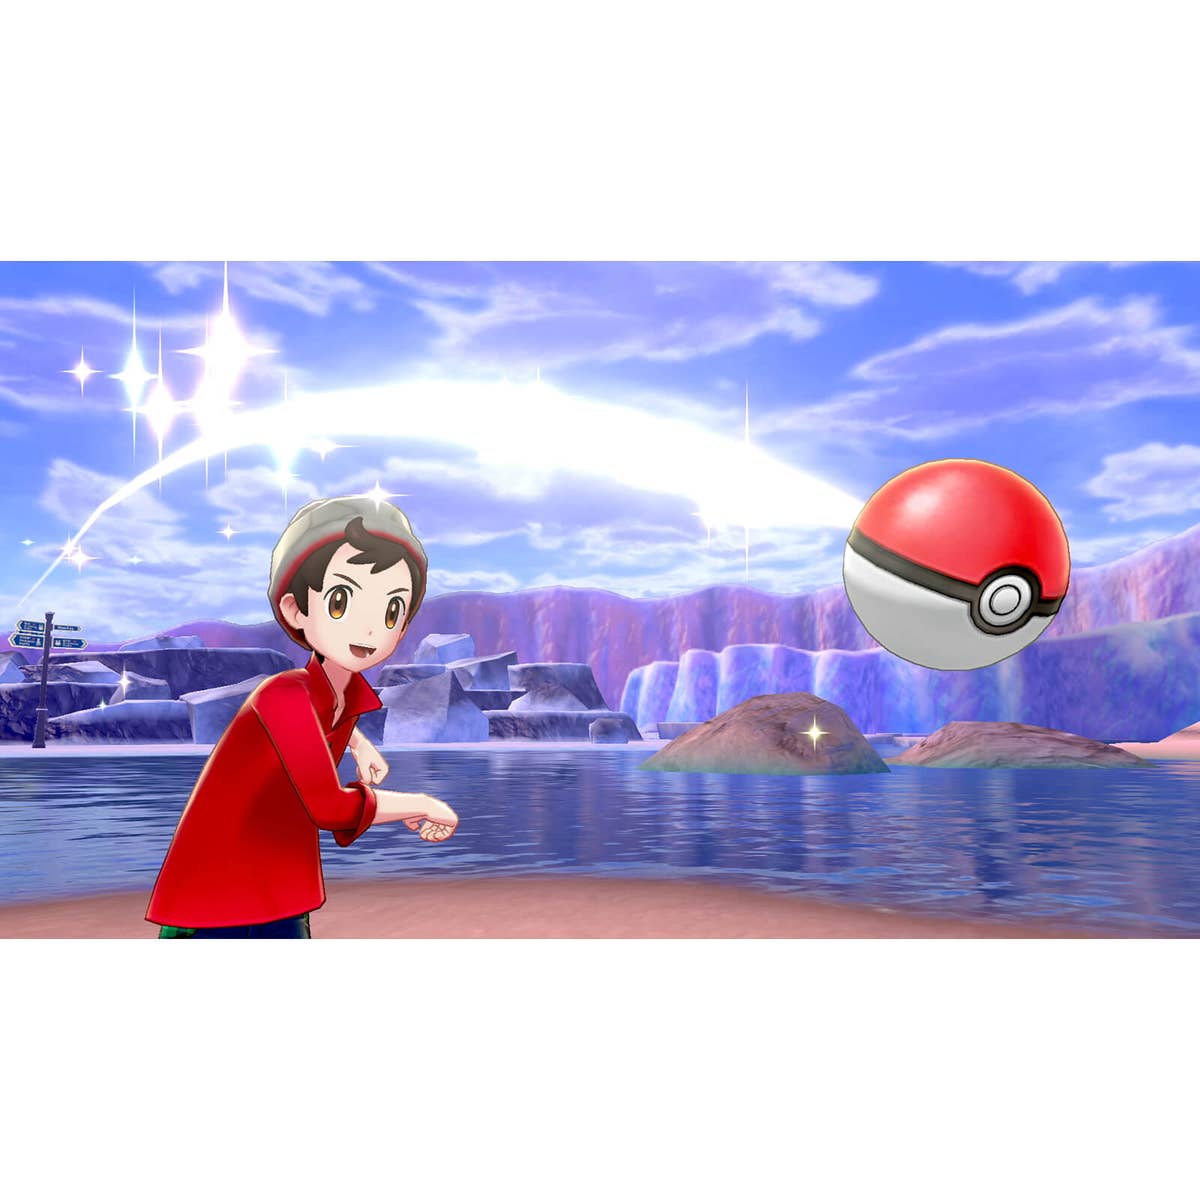 Increase PC box space in Pokemon Sword & Shield with handy trick